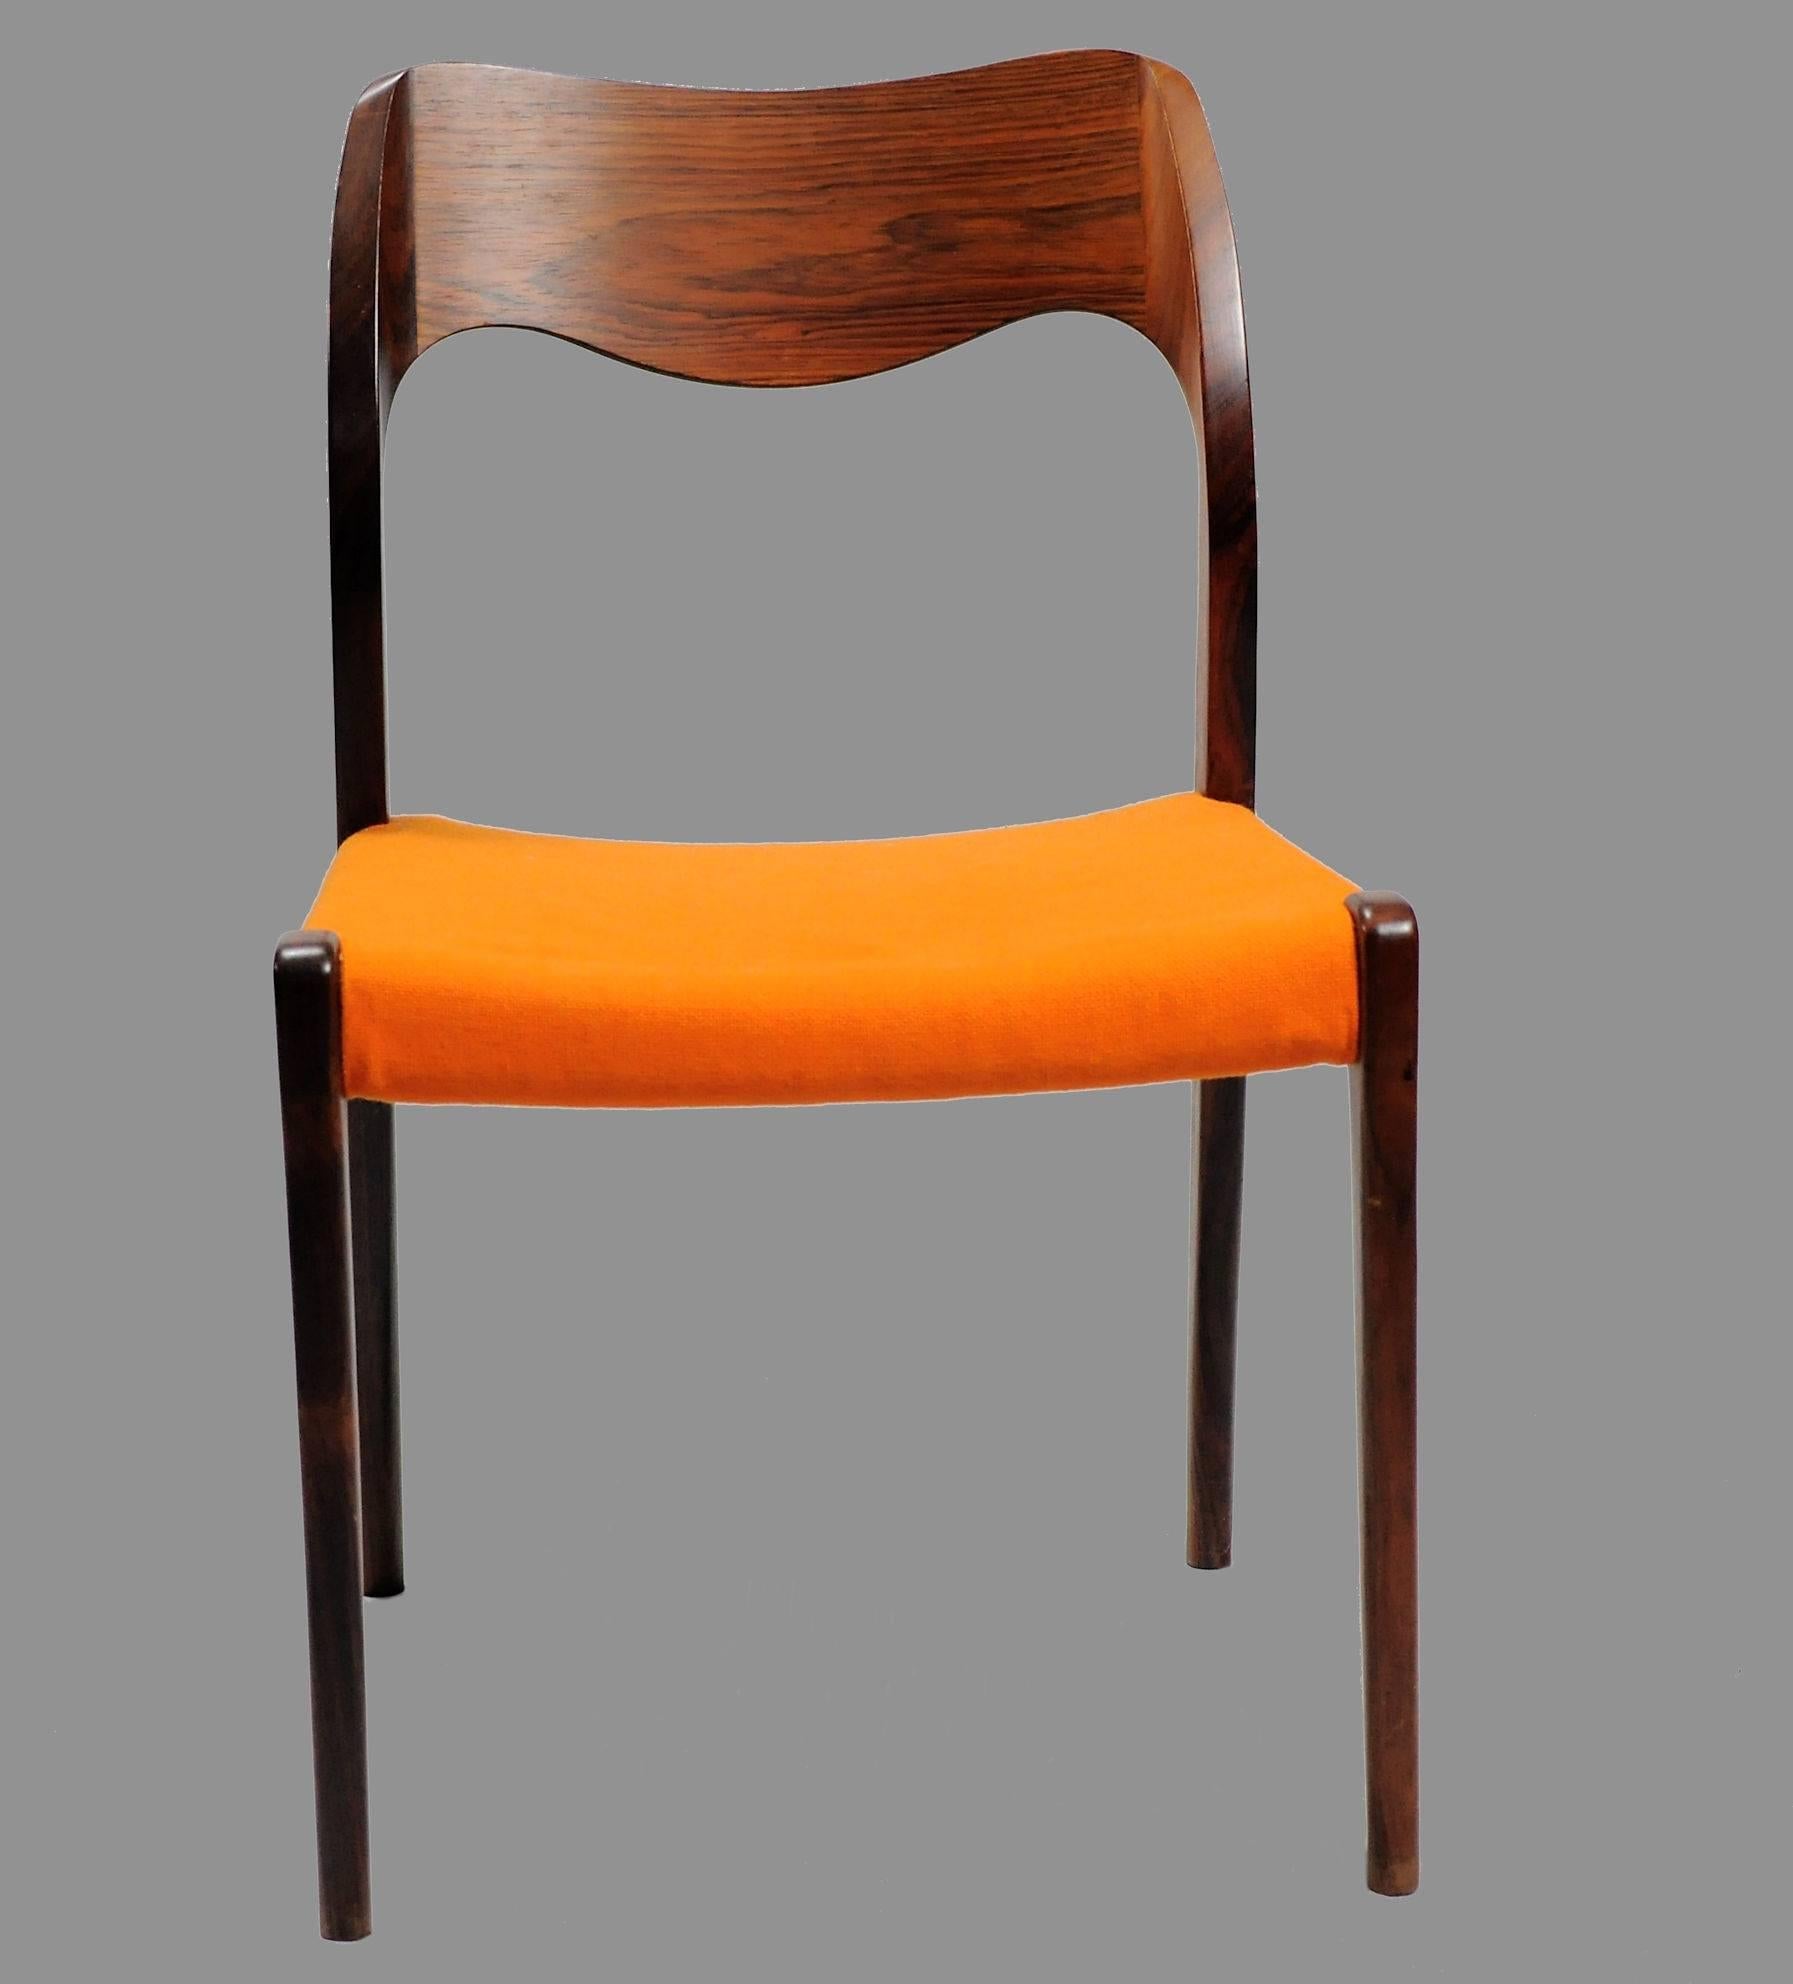 Set of 12 model 71 rosewood dining chairs designed by Niels Otto Møller in 1951.

The chairs feature a solid frame and back rest in rosewood designed with straight lined legs and an elegant organic shaped backrest with the soft lines and curves that